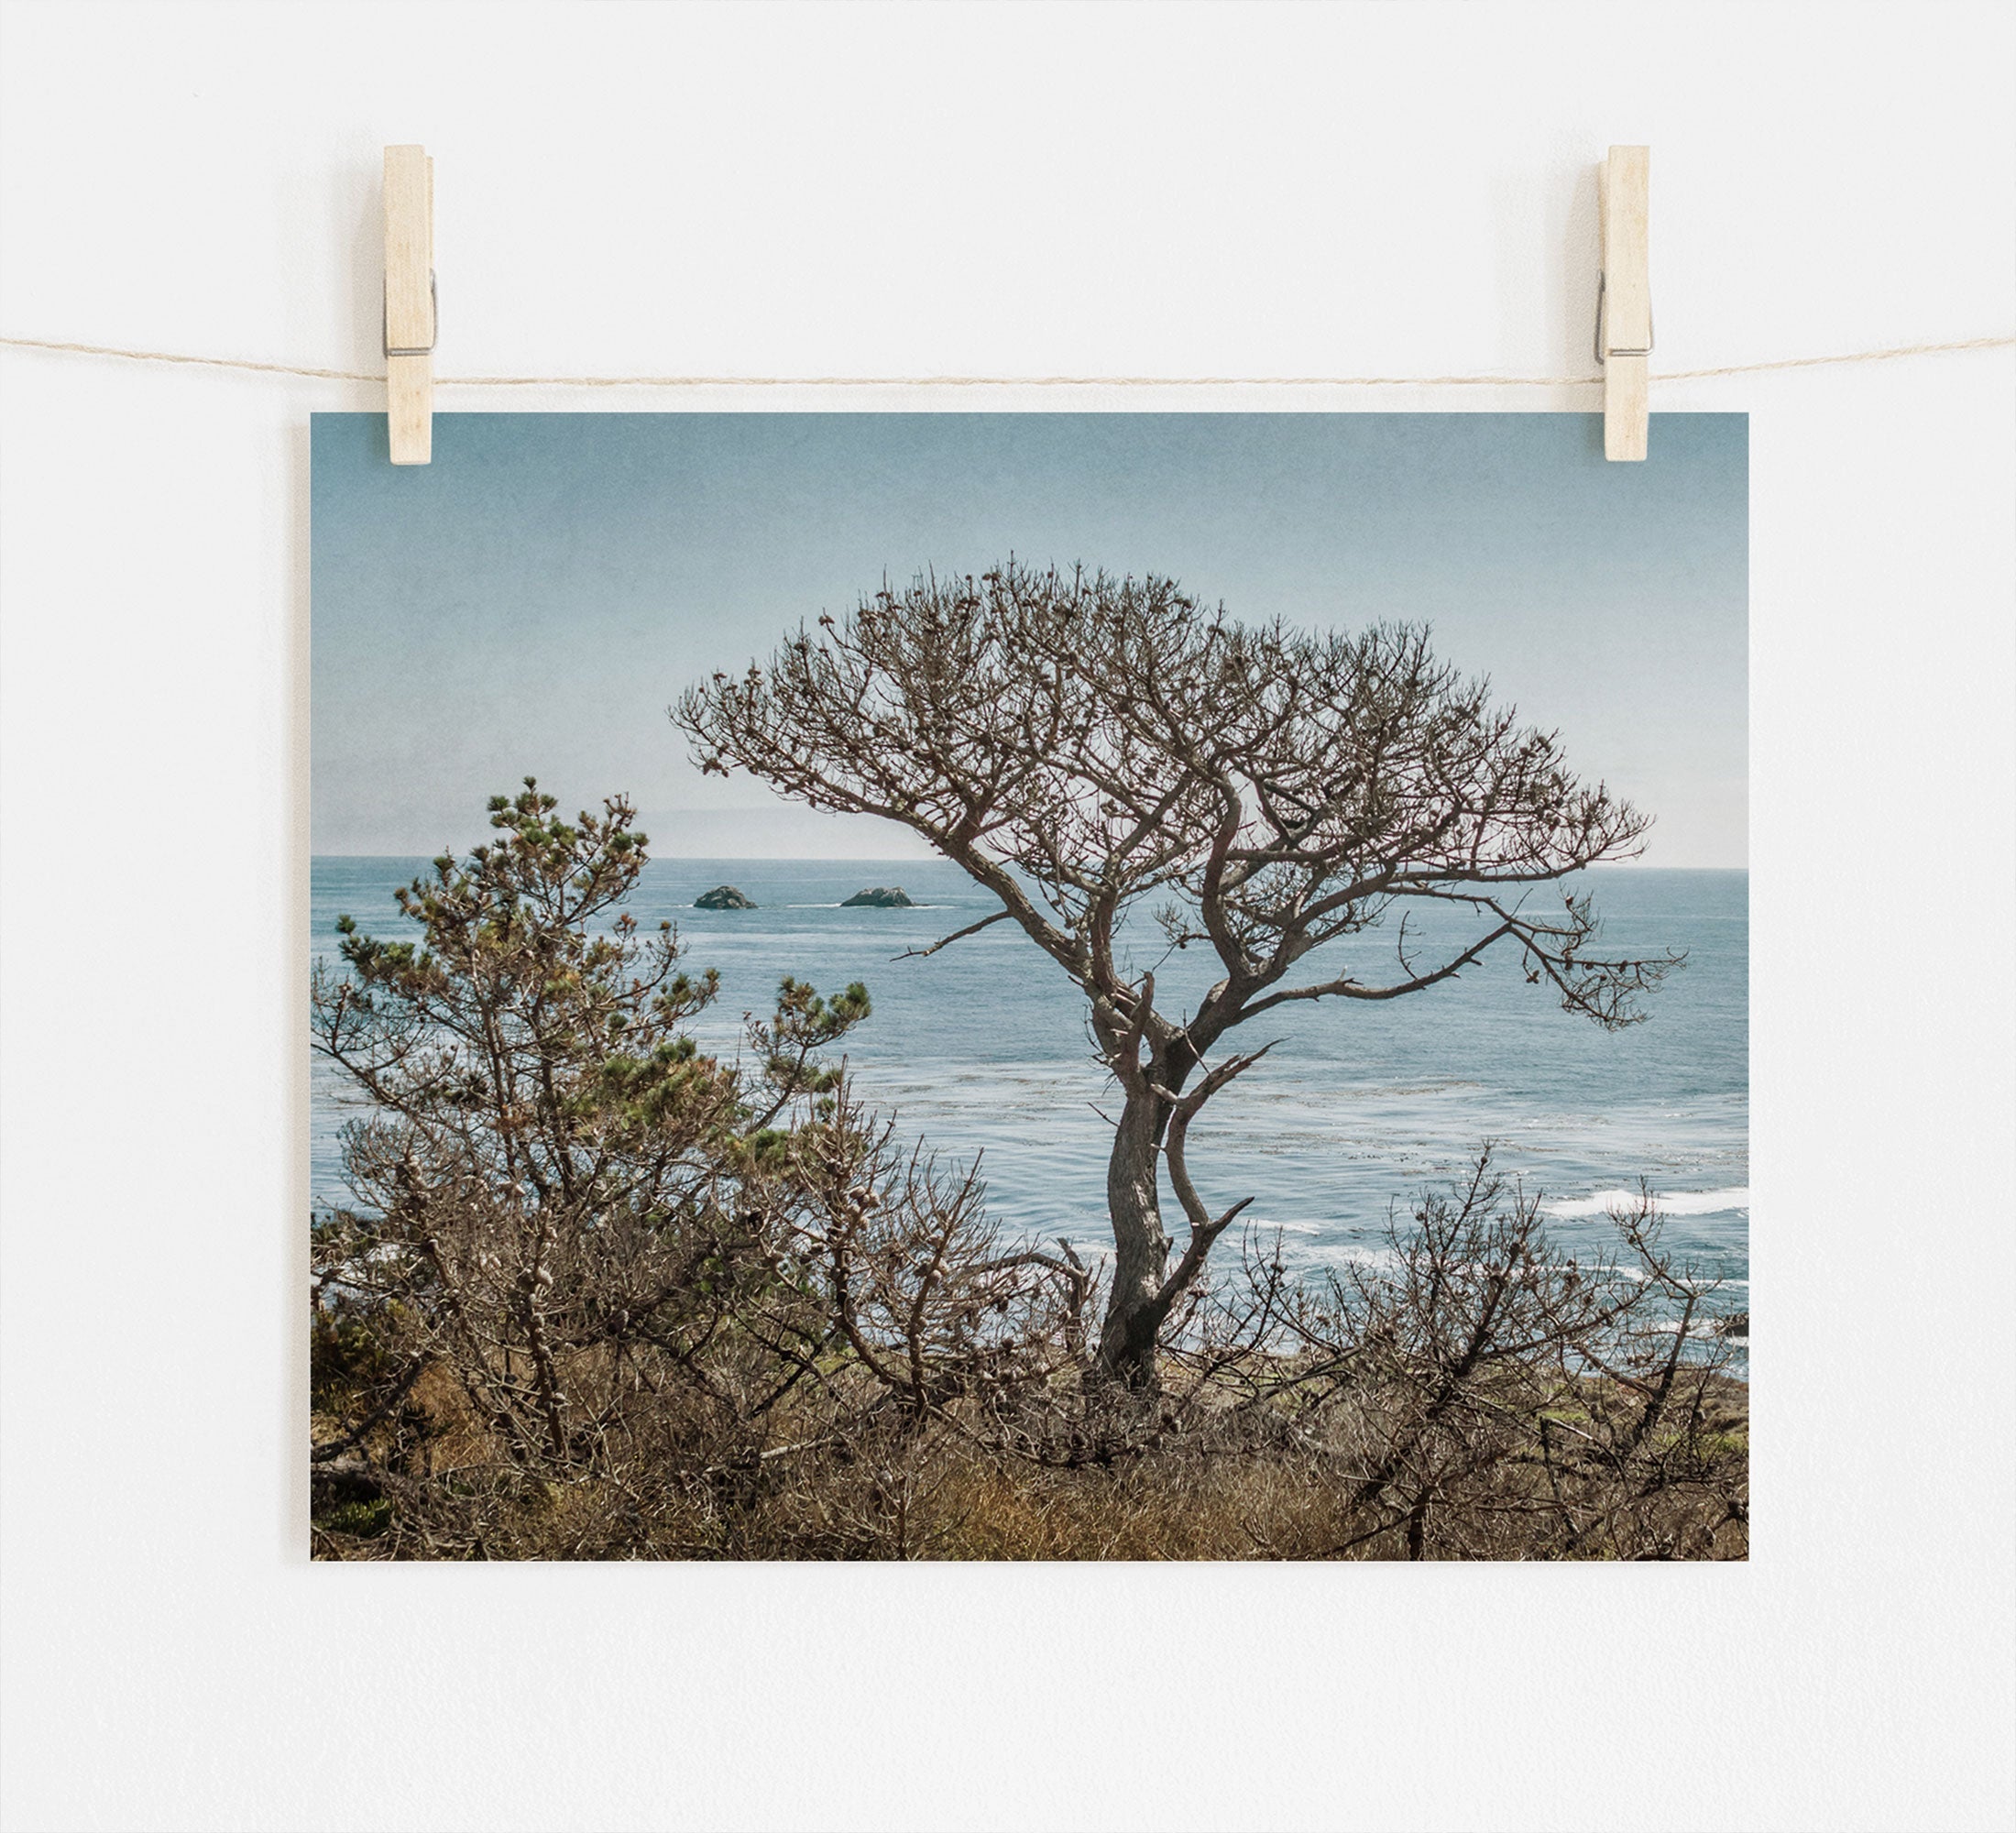 Photo print of a California Landscape Art in Big Sur, 'Wind Blown Tree' by Offley Green, pinned on a wall with wooden clothespins.